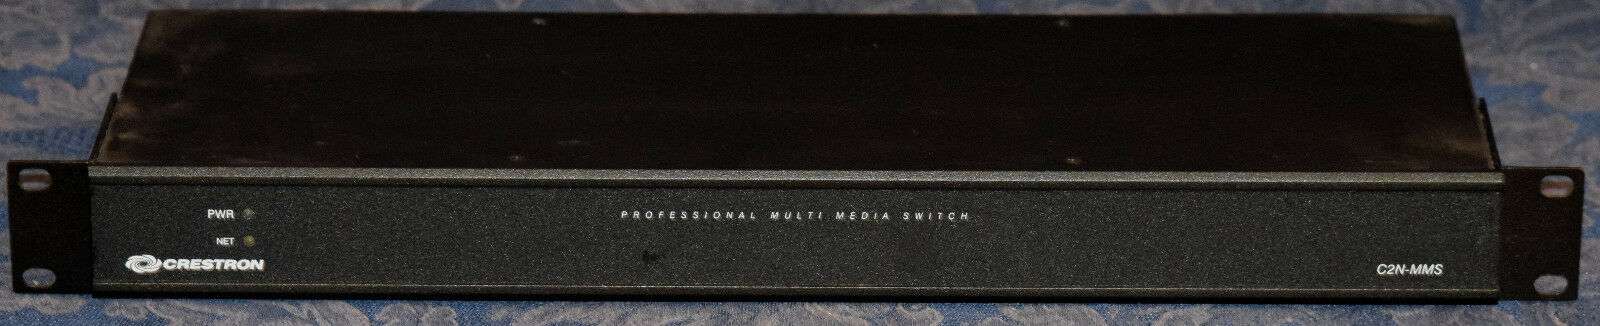 Crestron C2N-MMS Professional Multimedia Switch/VIDEO,RGB InputsOutputs UNTESTED